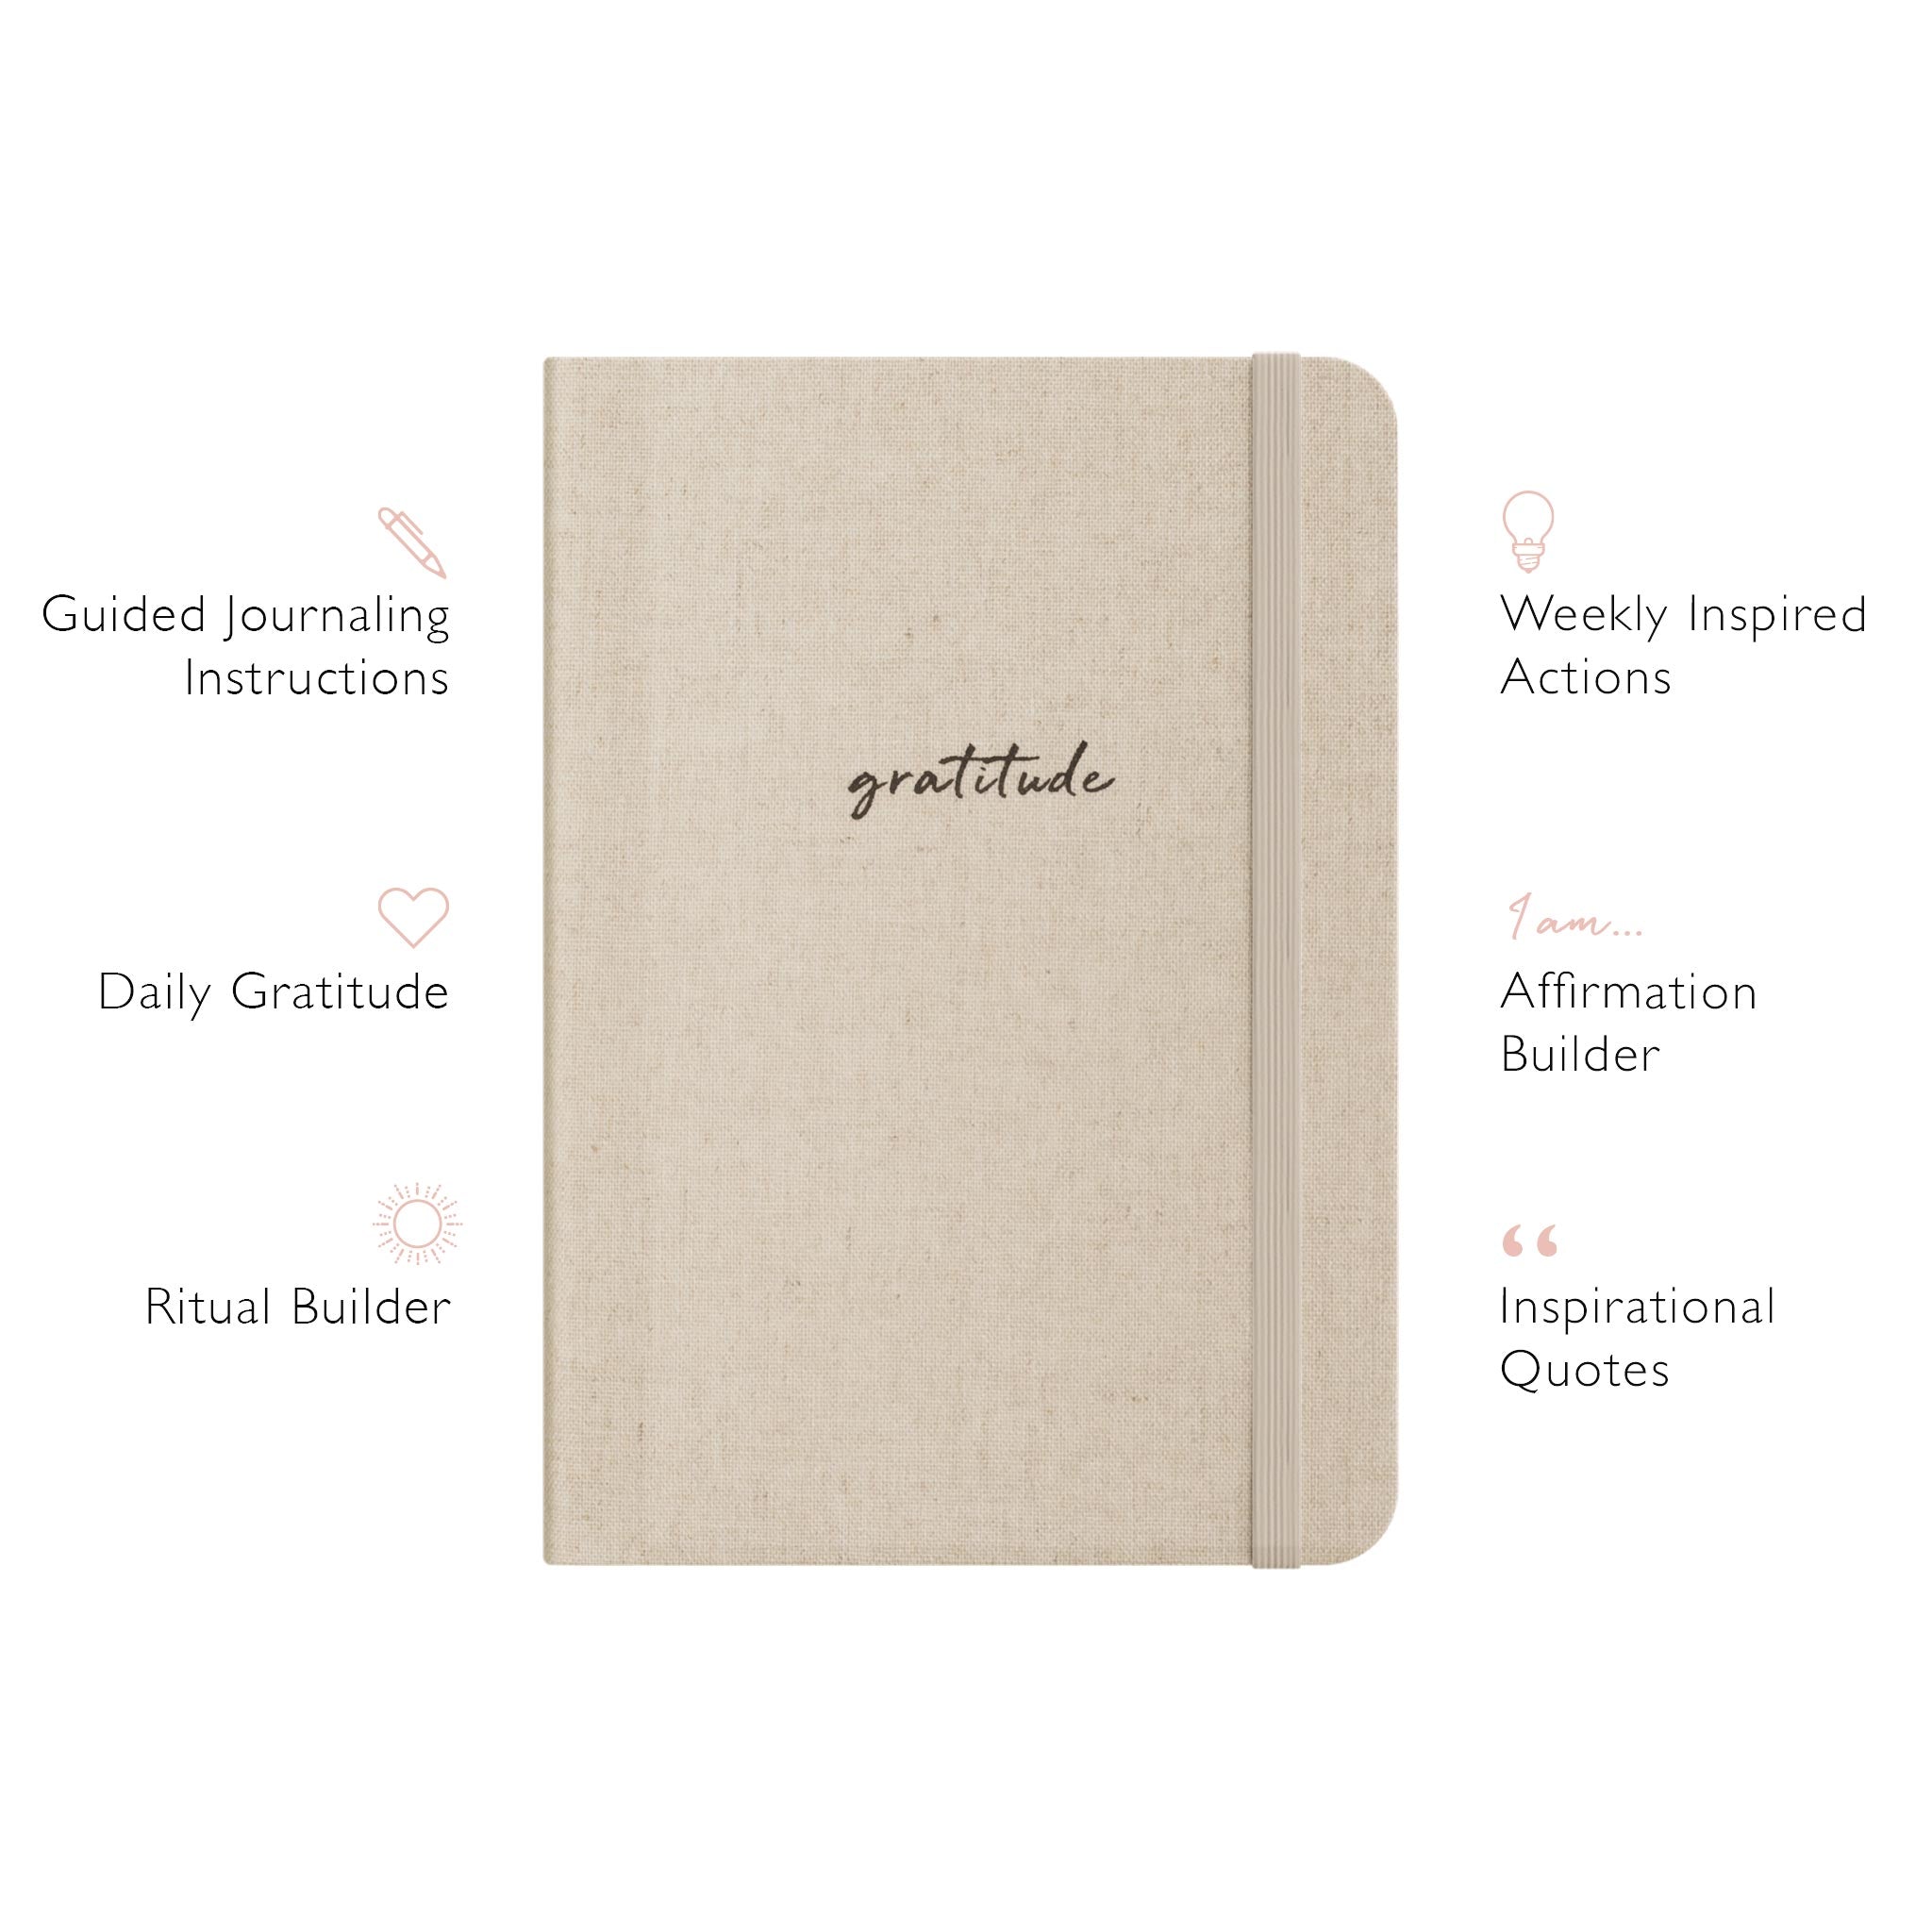 Daily Gratitude Journal for Women - 6 Months Positivity and Grateful  Journal - Guided Journal with Prompts, Affirmation Journal, Mindfulness  Journal